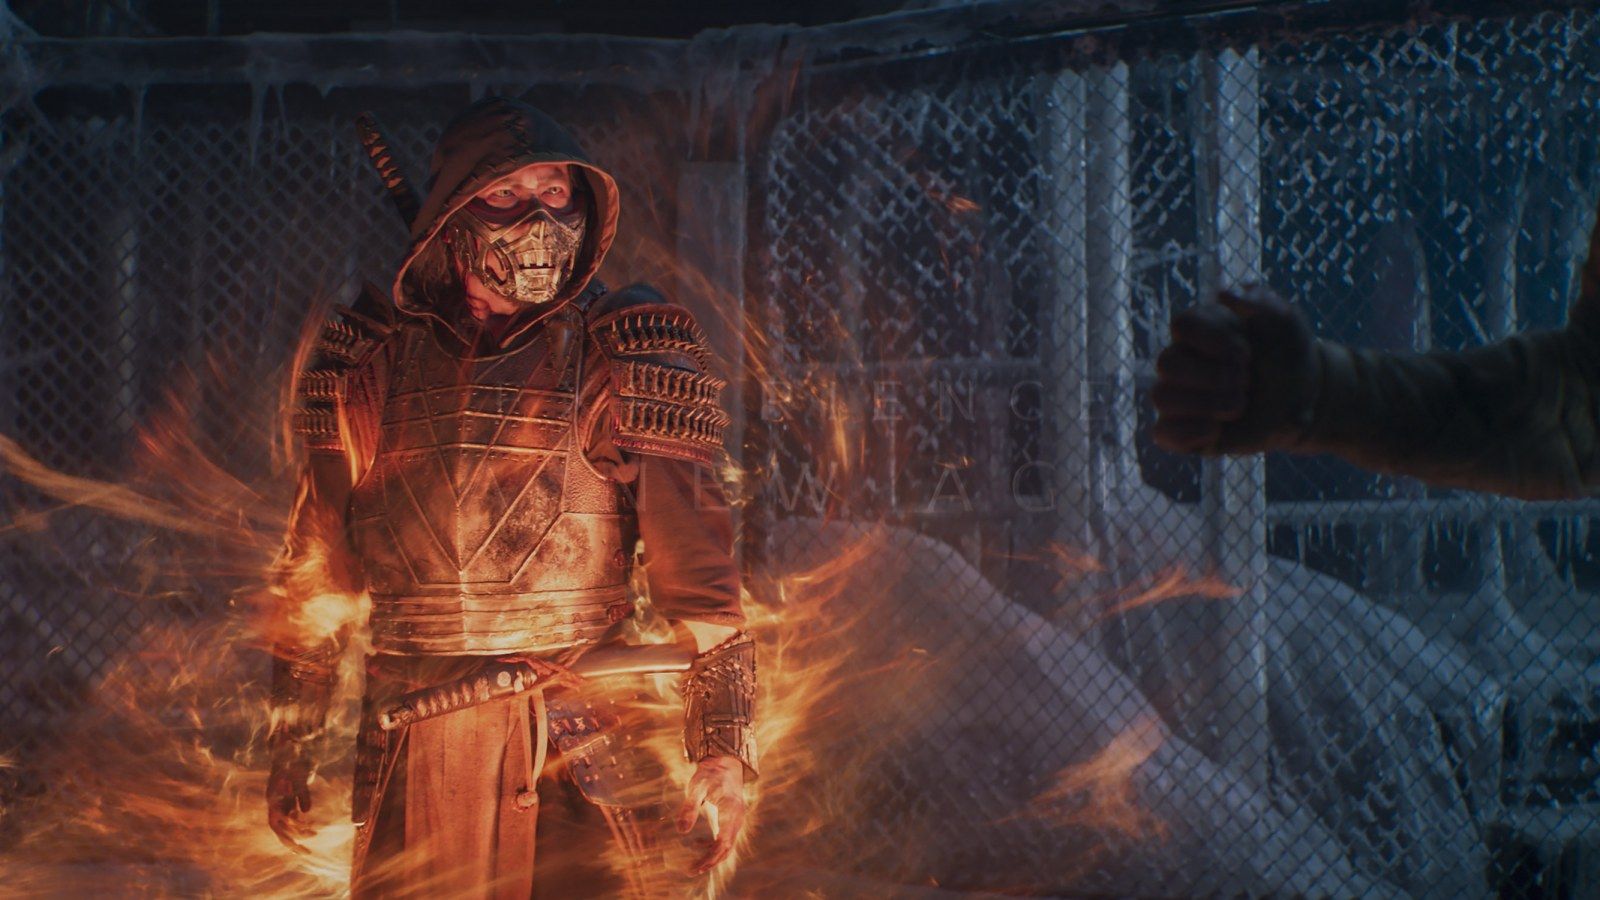 Watch the First 7 Minutes of the 'Mortal Kombat' Movie Now